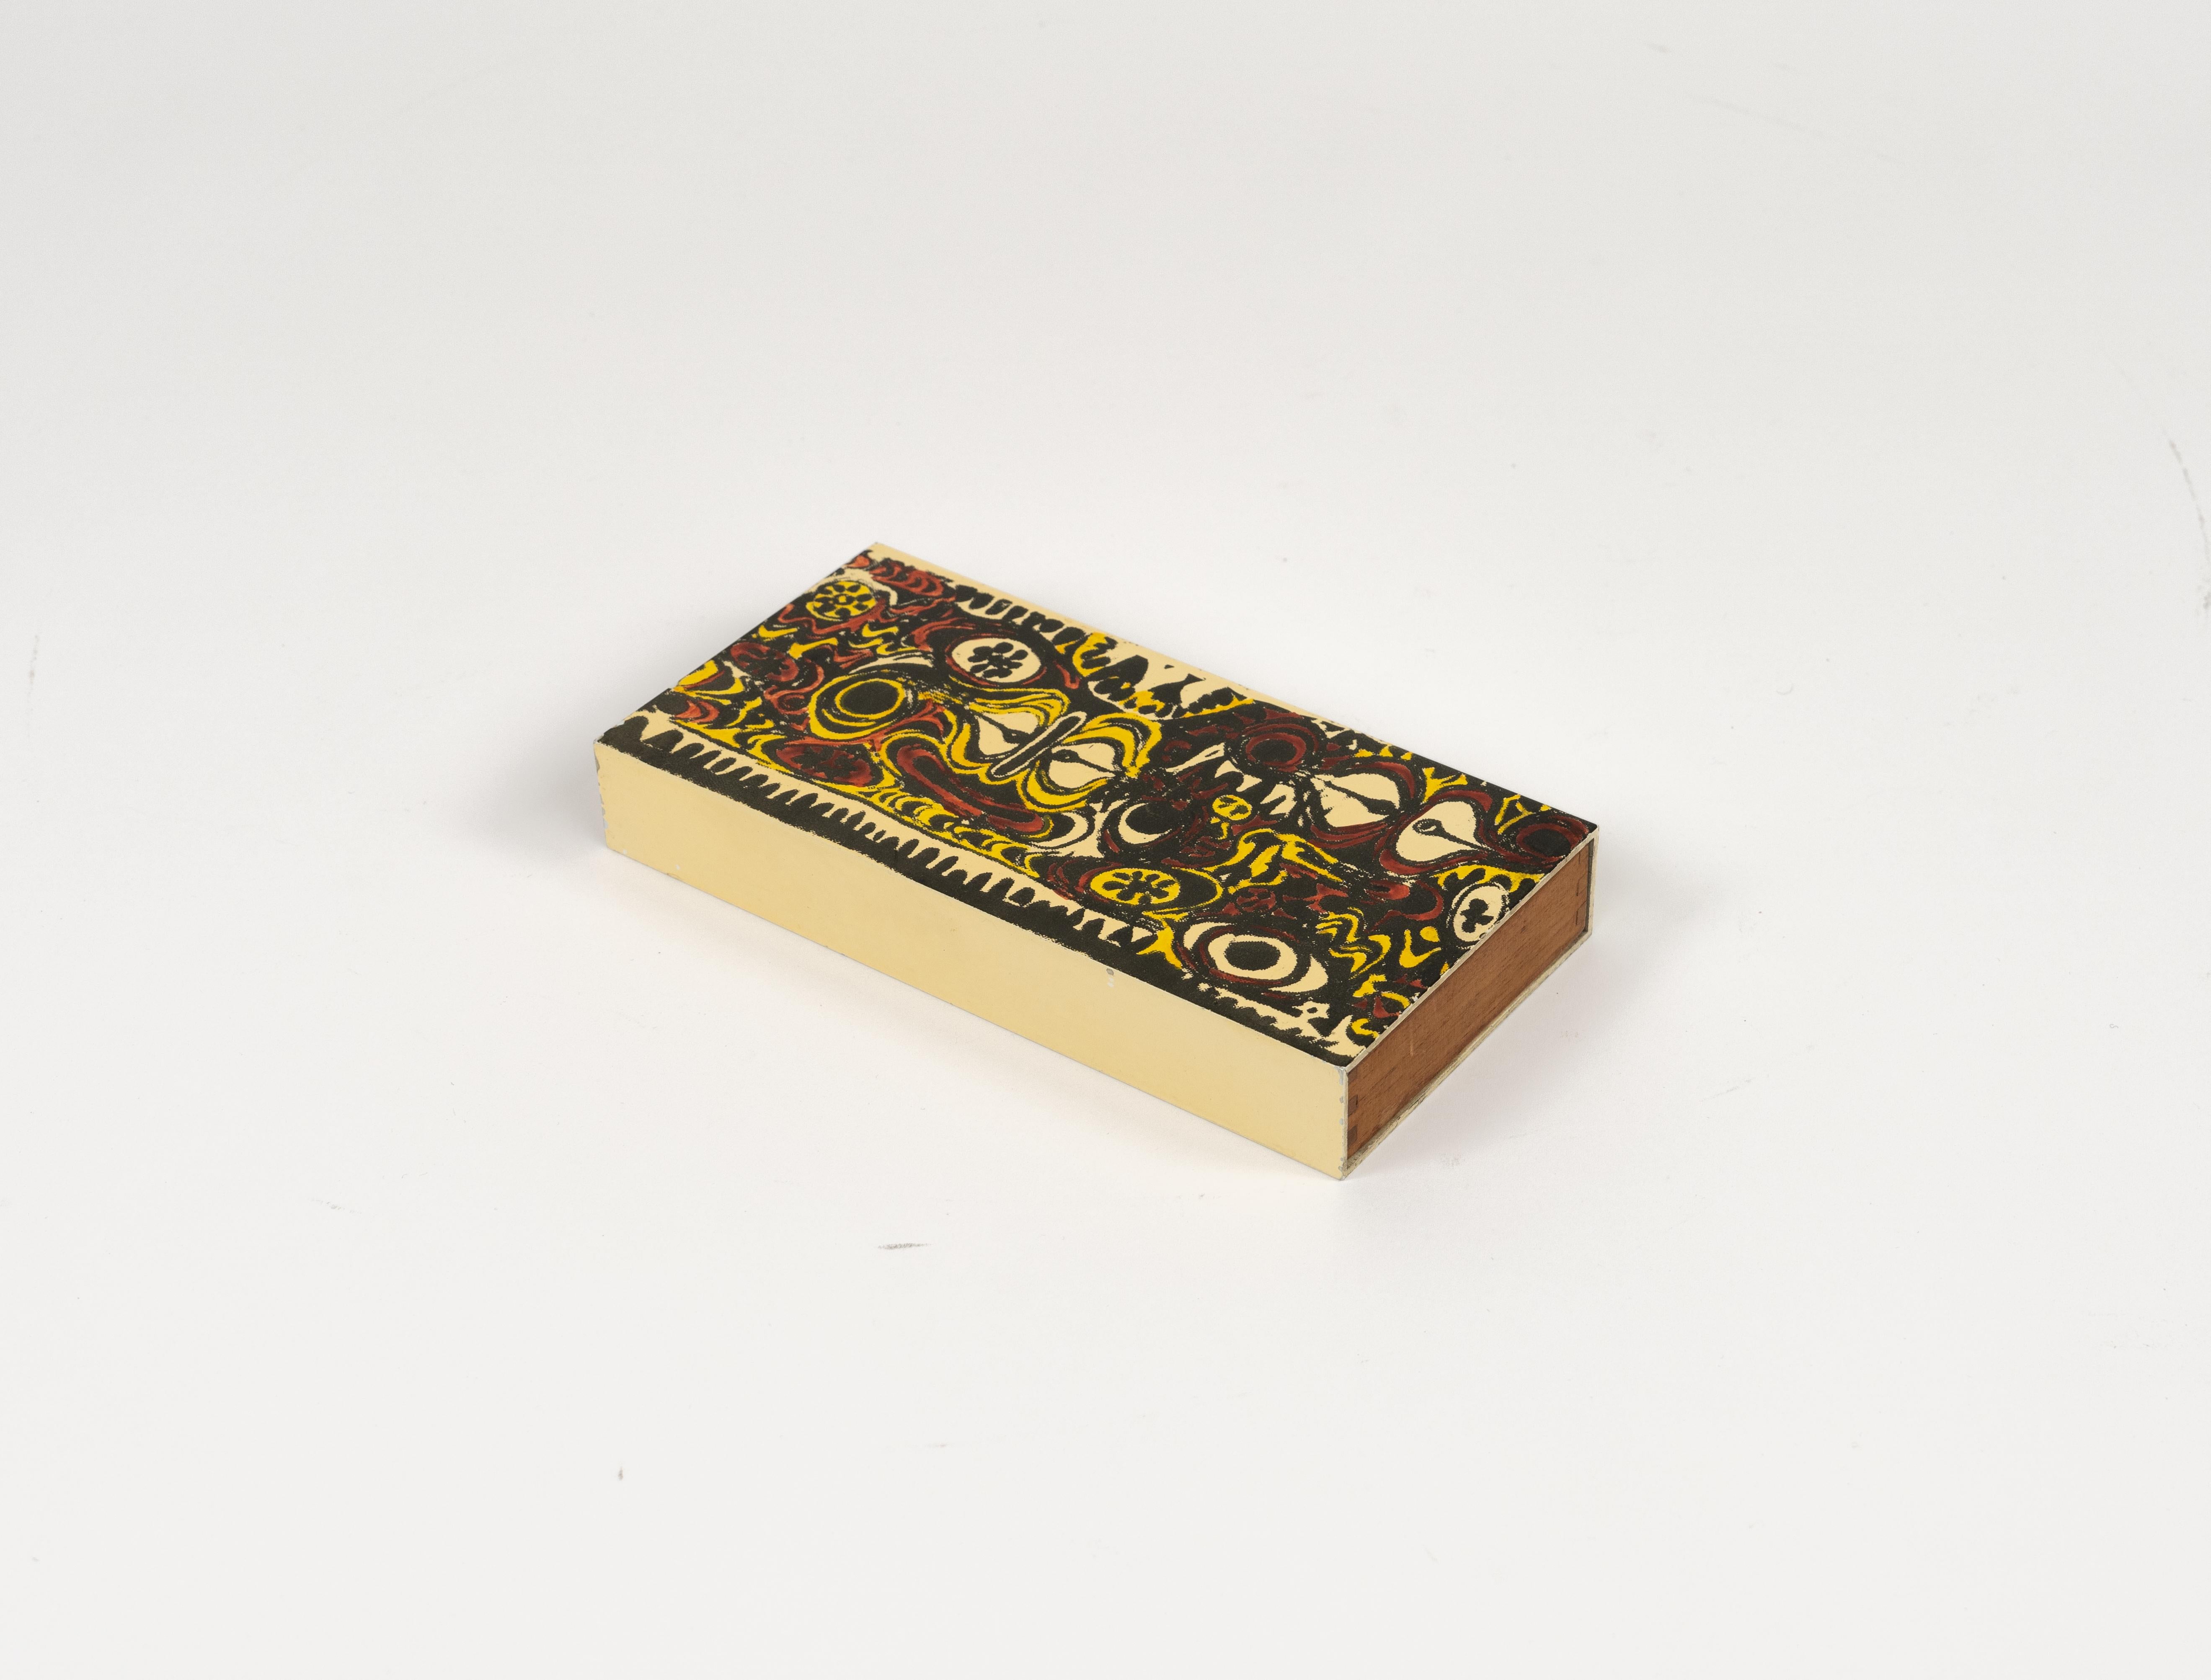 Midcentury beautiful rectangular decorative box attributed to Piero Fornasetti. 

It has a enameled metal cover and wooden inner compartment.

Made in Italy in the 1960s.  

Perfect desk object or gift idea.  

The Italian painter, sculptor,